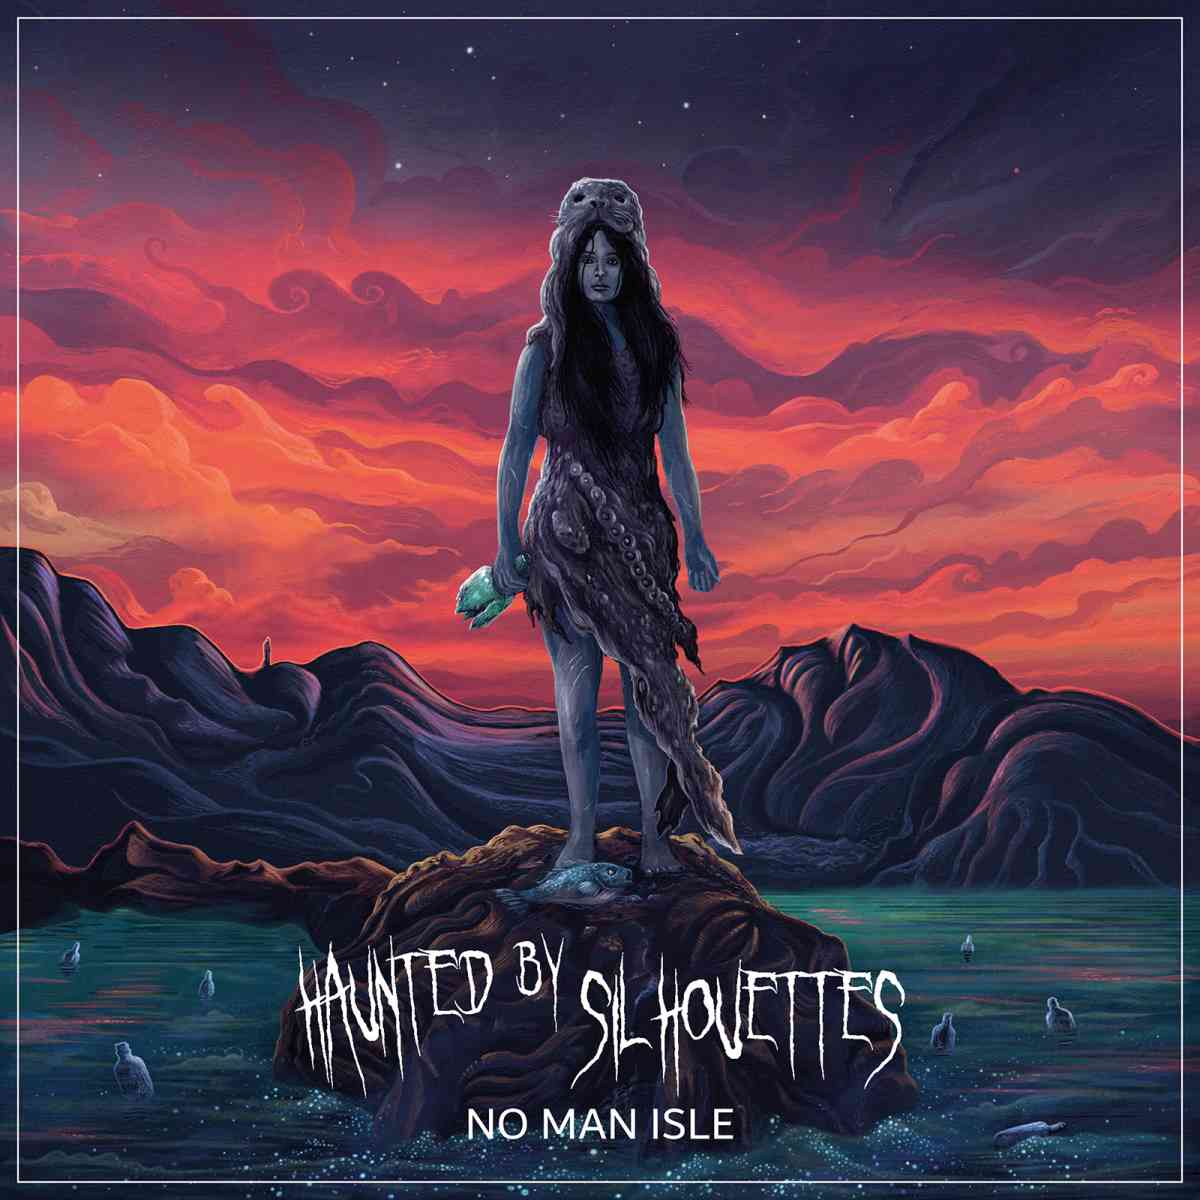 Haunted By Silhouettes - no man isle - album cover